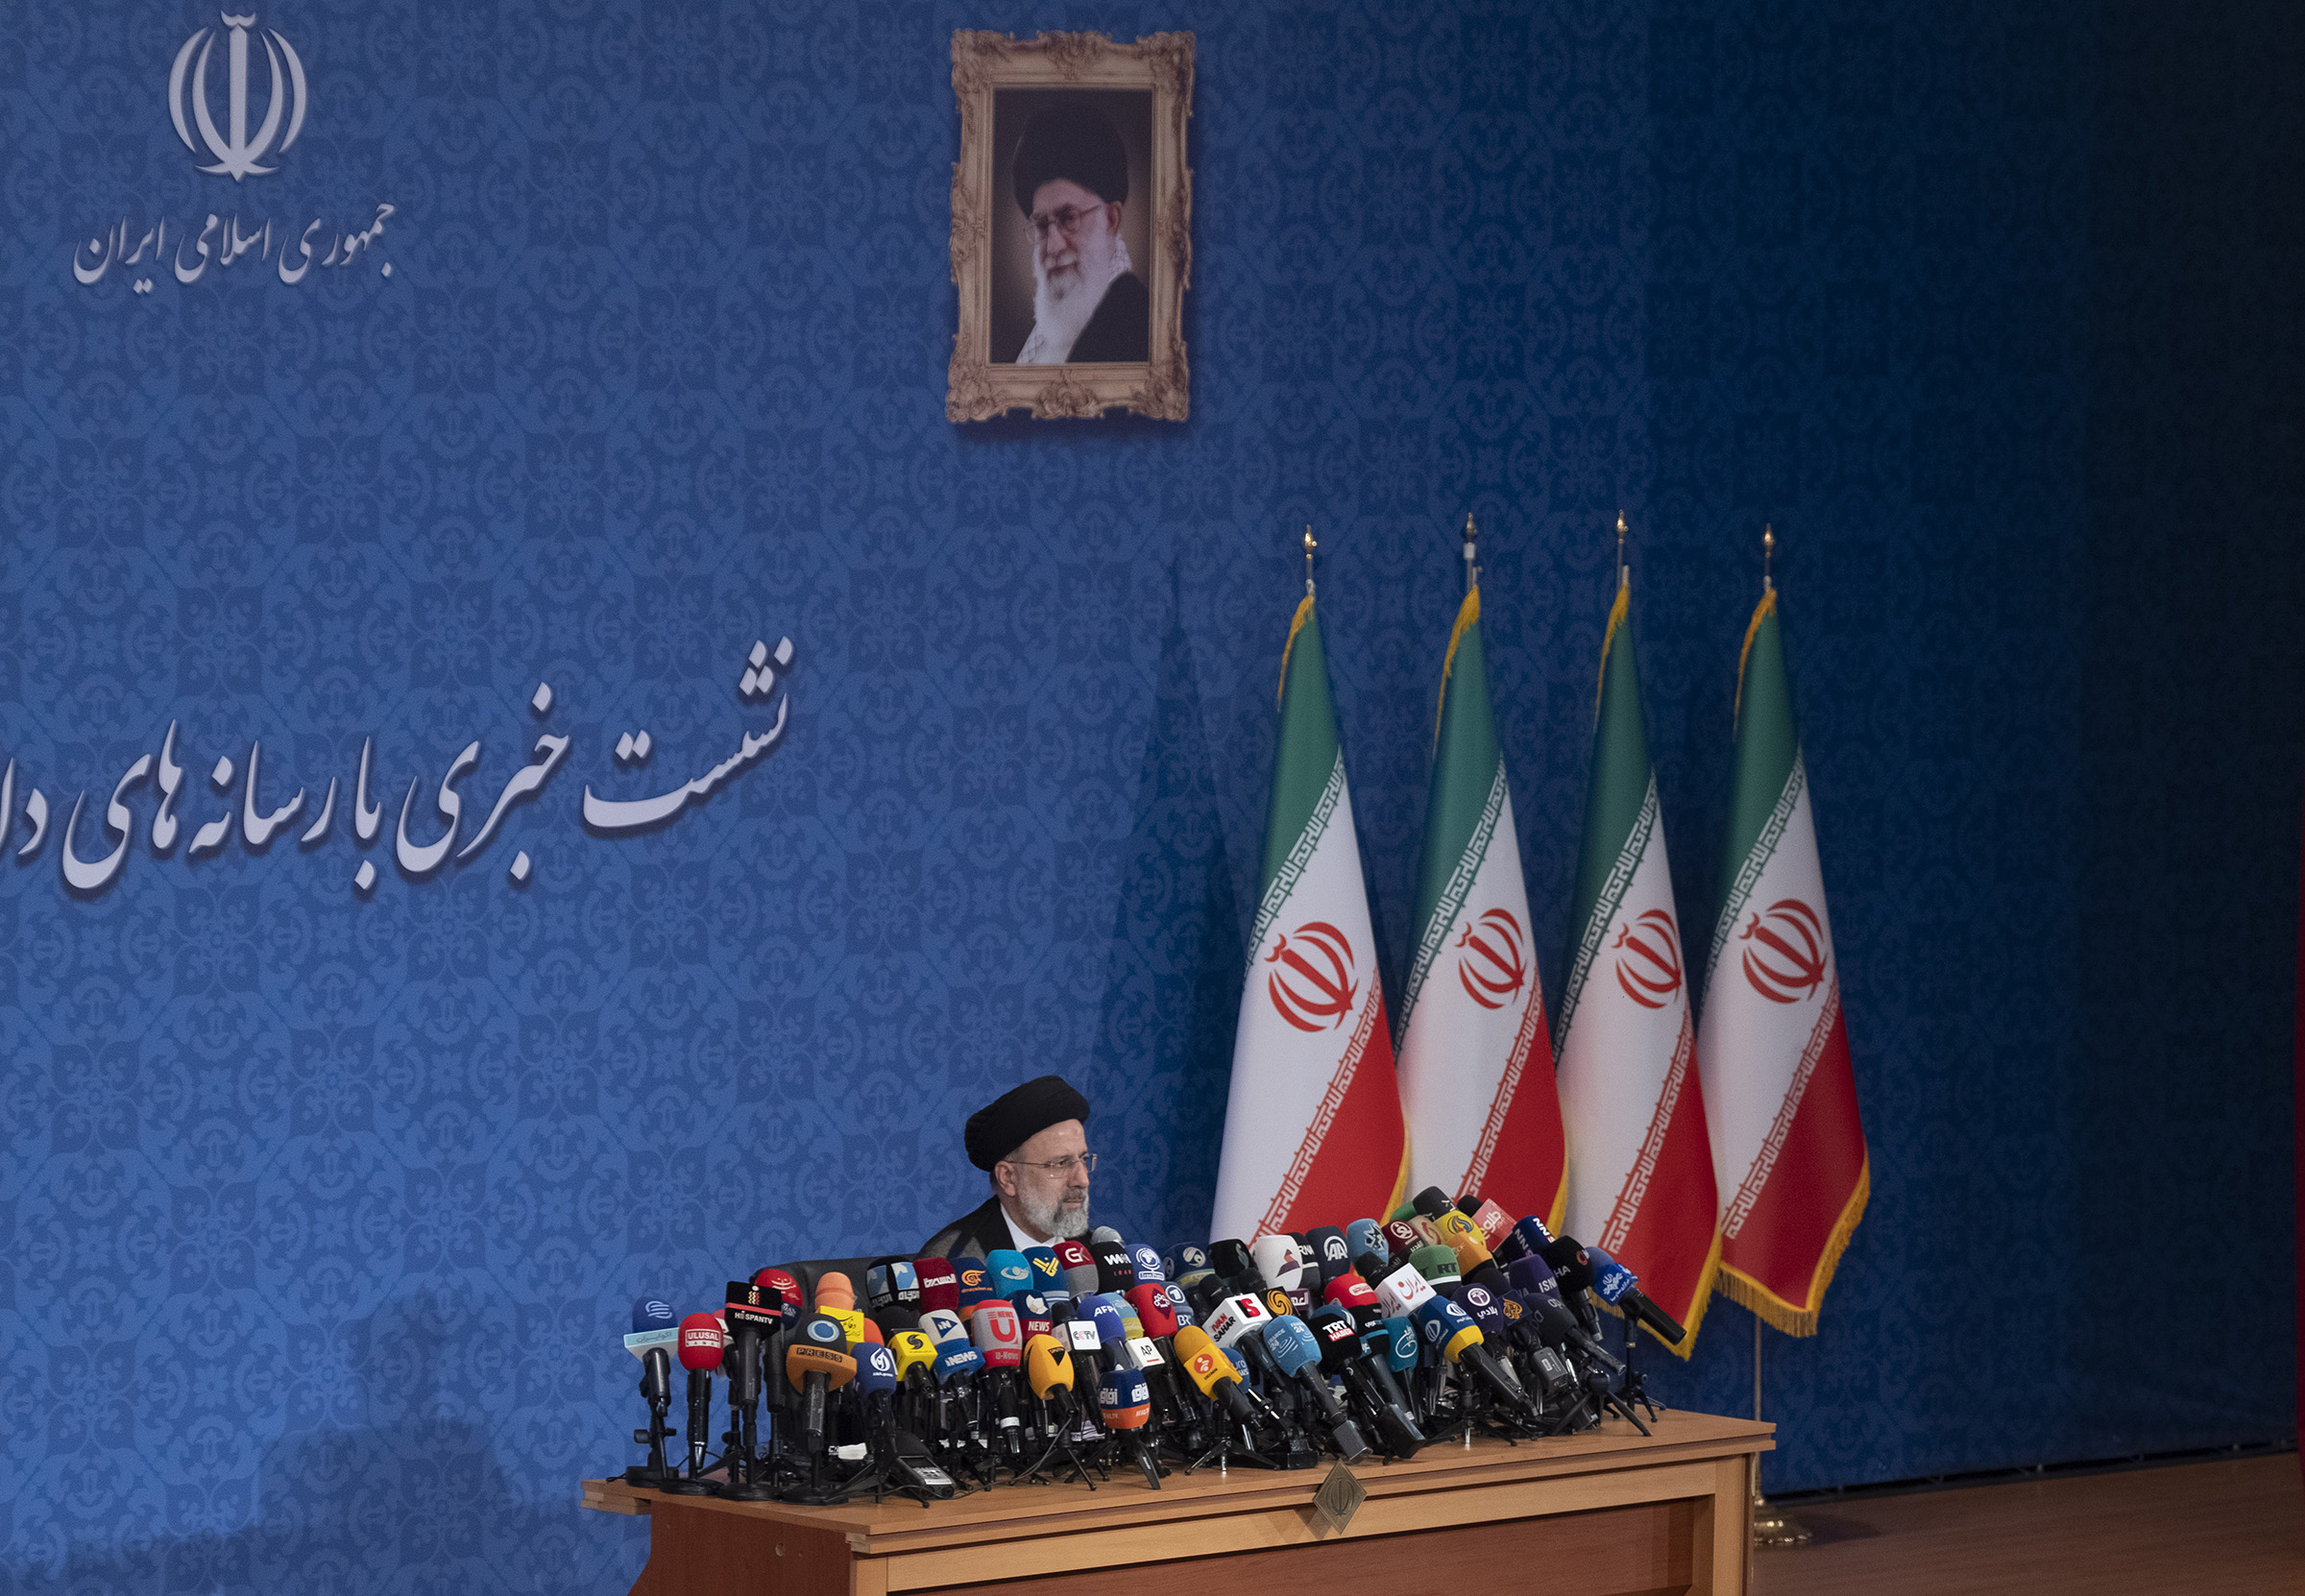 Iranian President elect Ebrahim Raisi attends a news conference for speaking with local and international media in Tehran on June 21, 2021. (Getty Images)